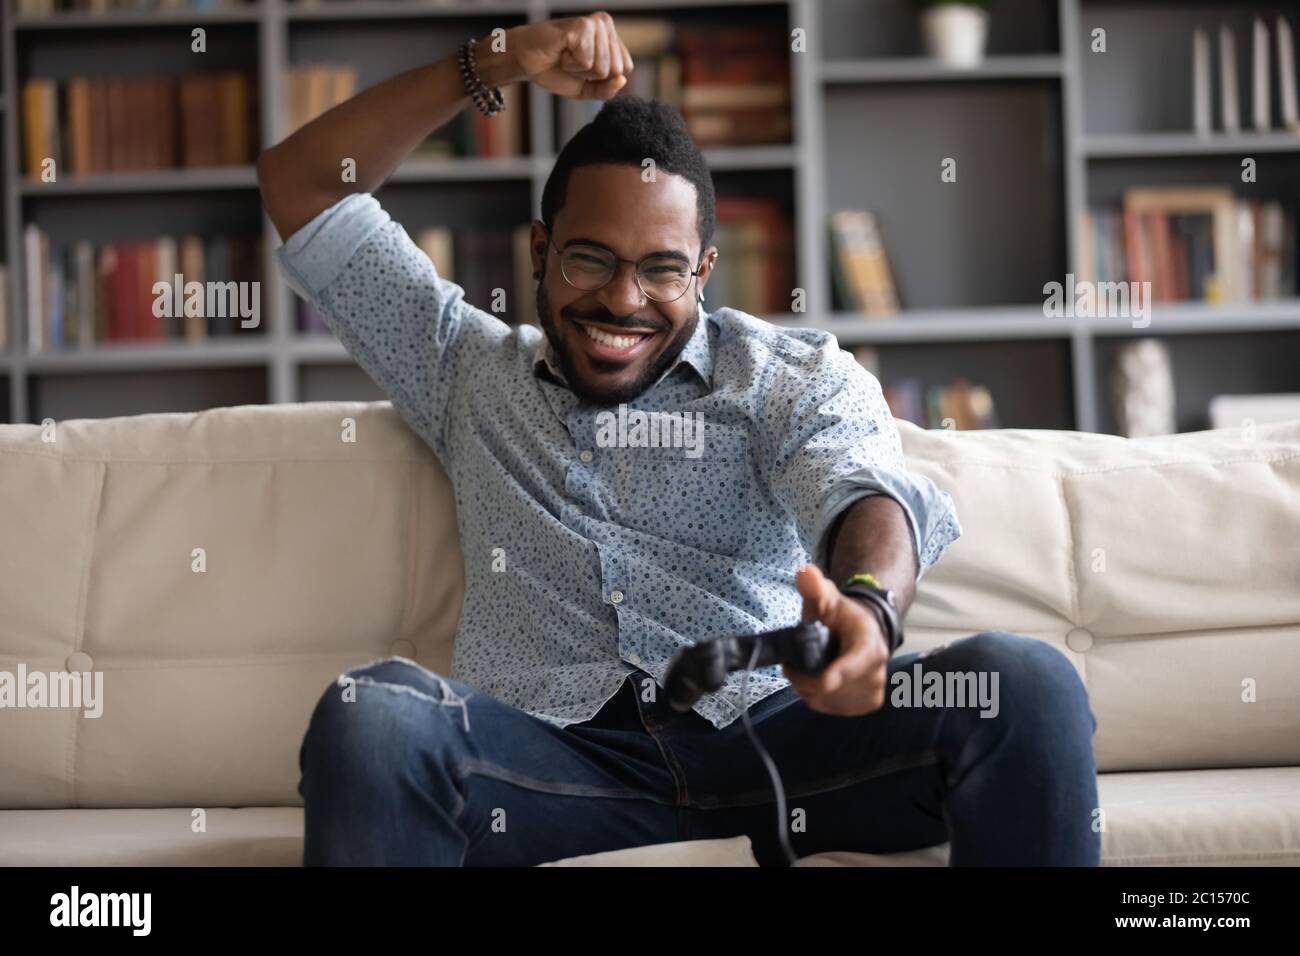 Excited African guy holding joypad celebrating victory in playstation games Stock Photo